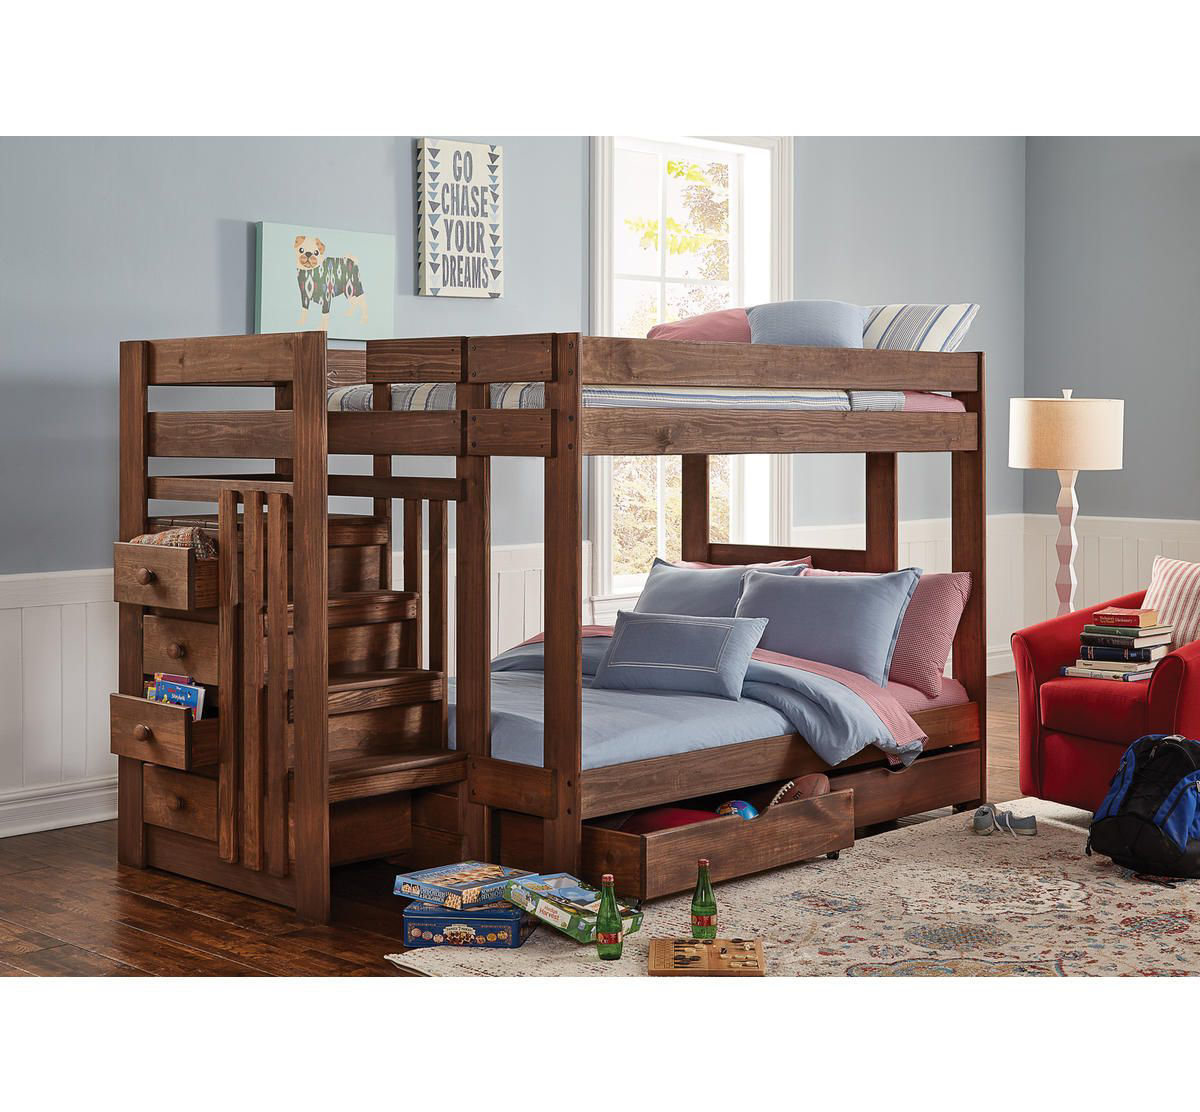 Solid Wood Full Size Bunk Beds, Solid Wood Full Size Bunk Beds